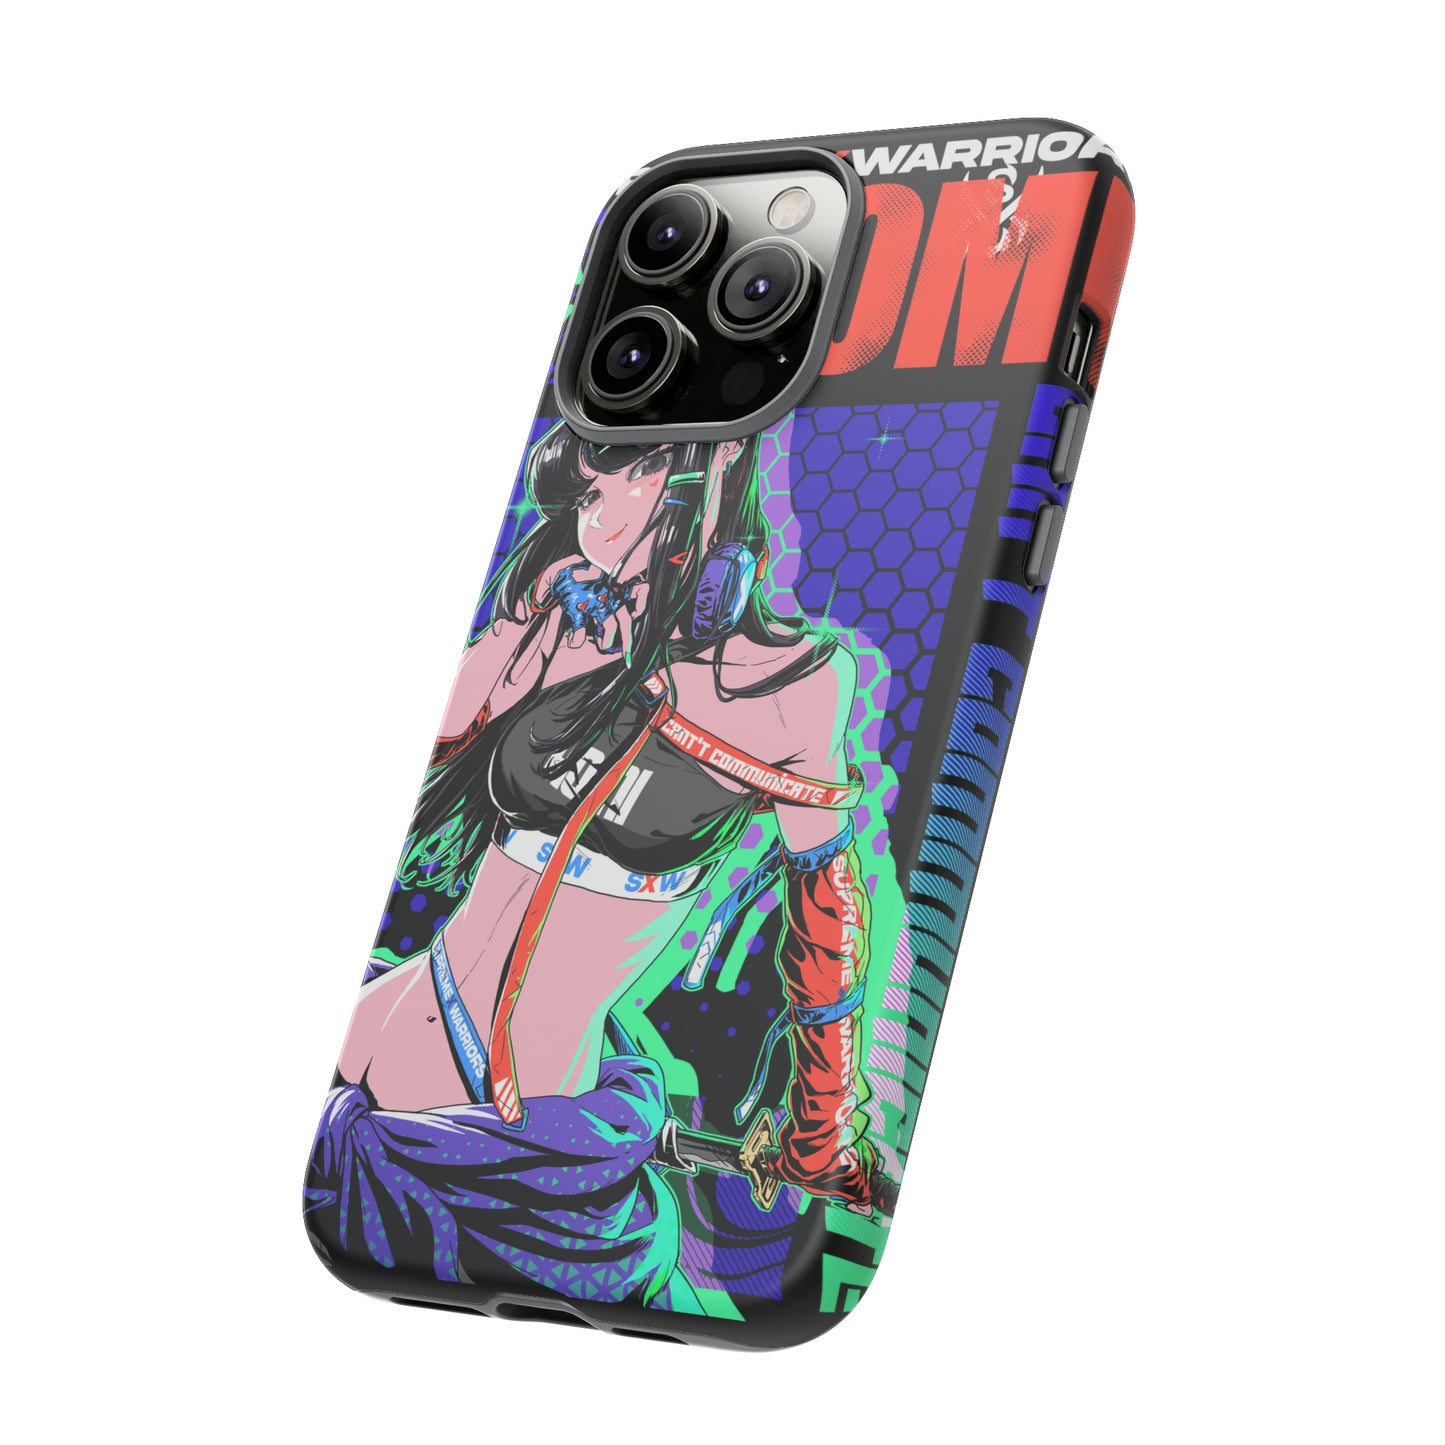 Komi / iPhone Cases - LIMITED